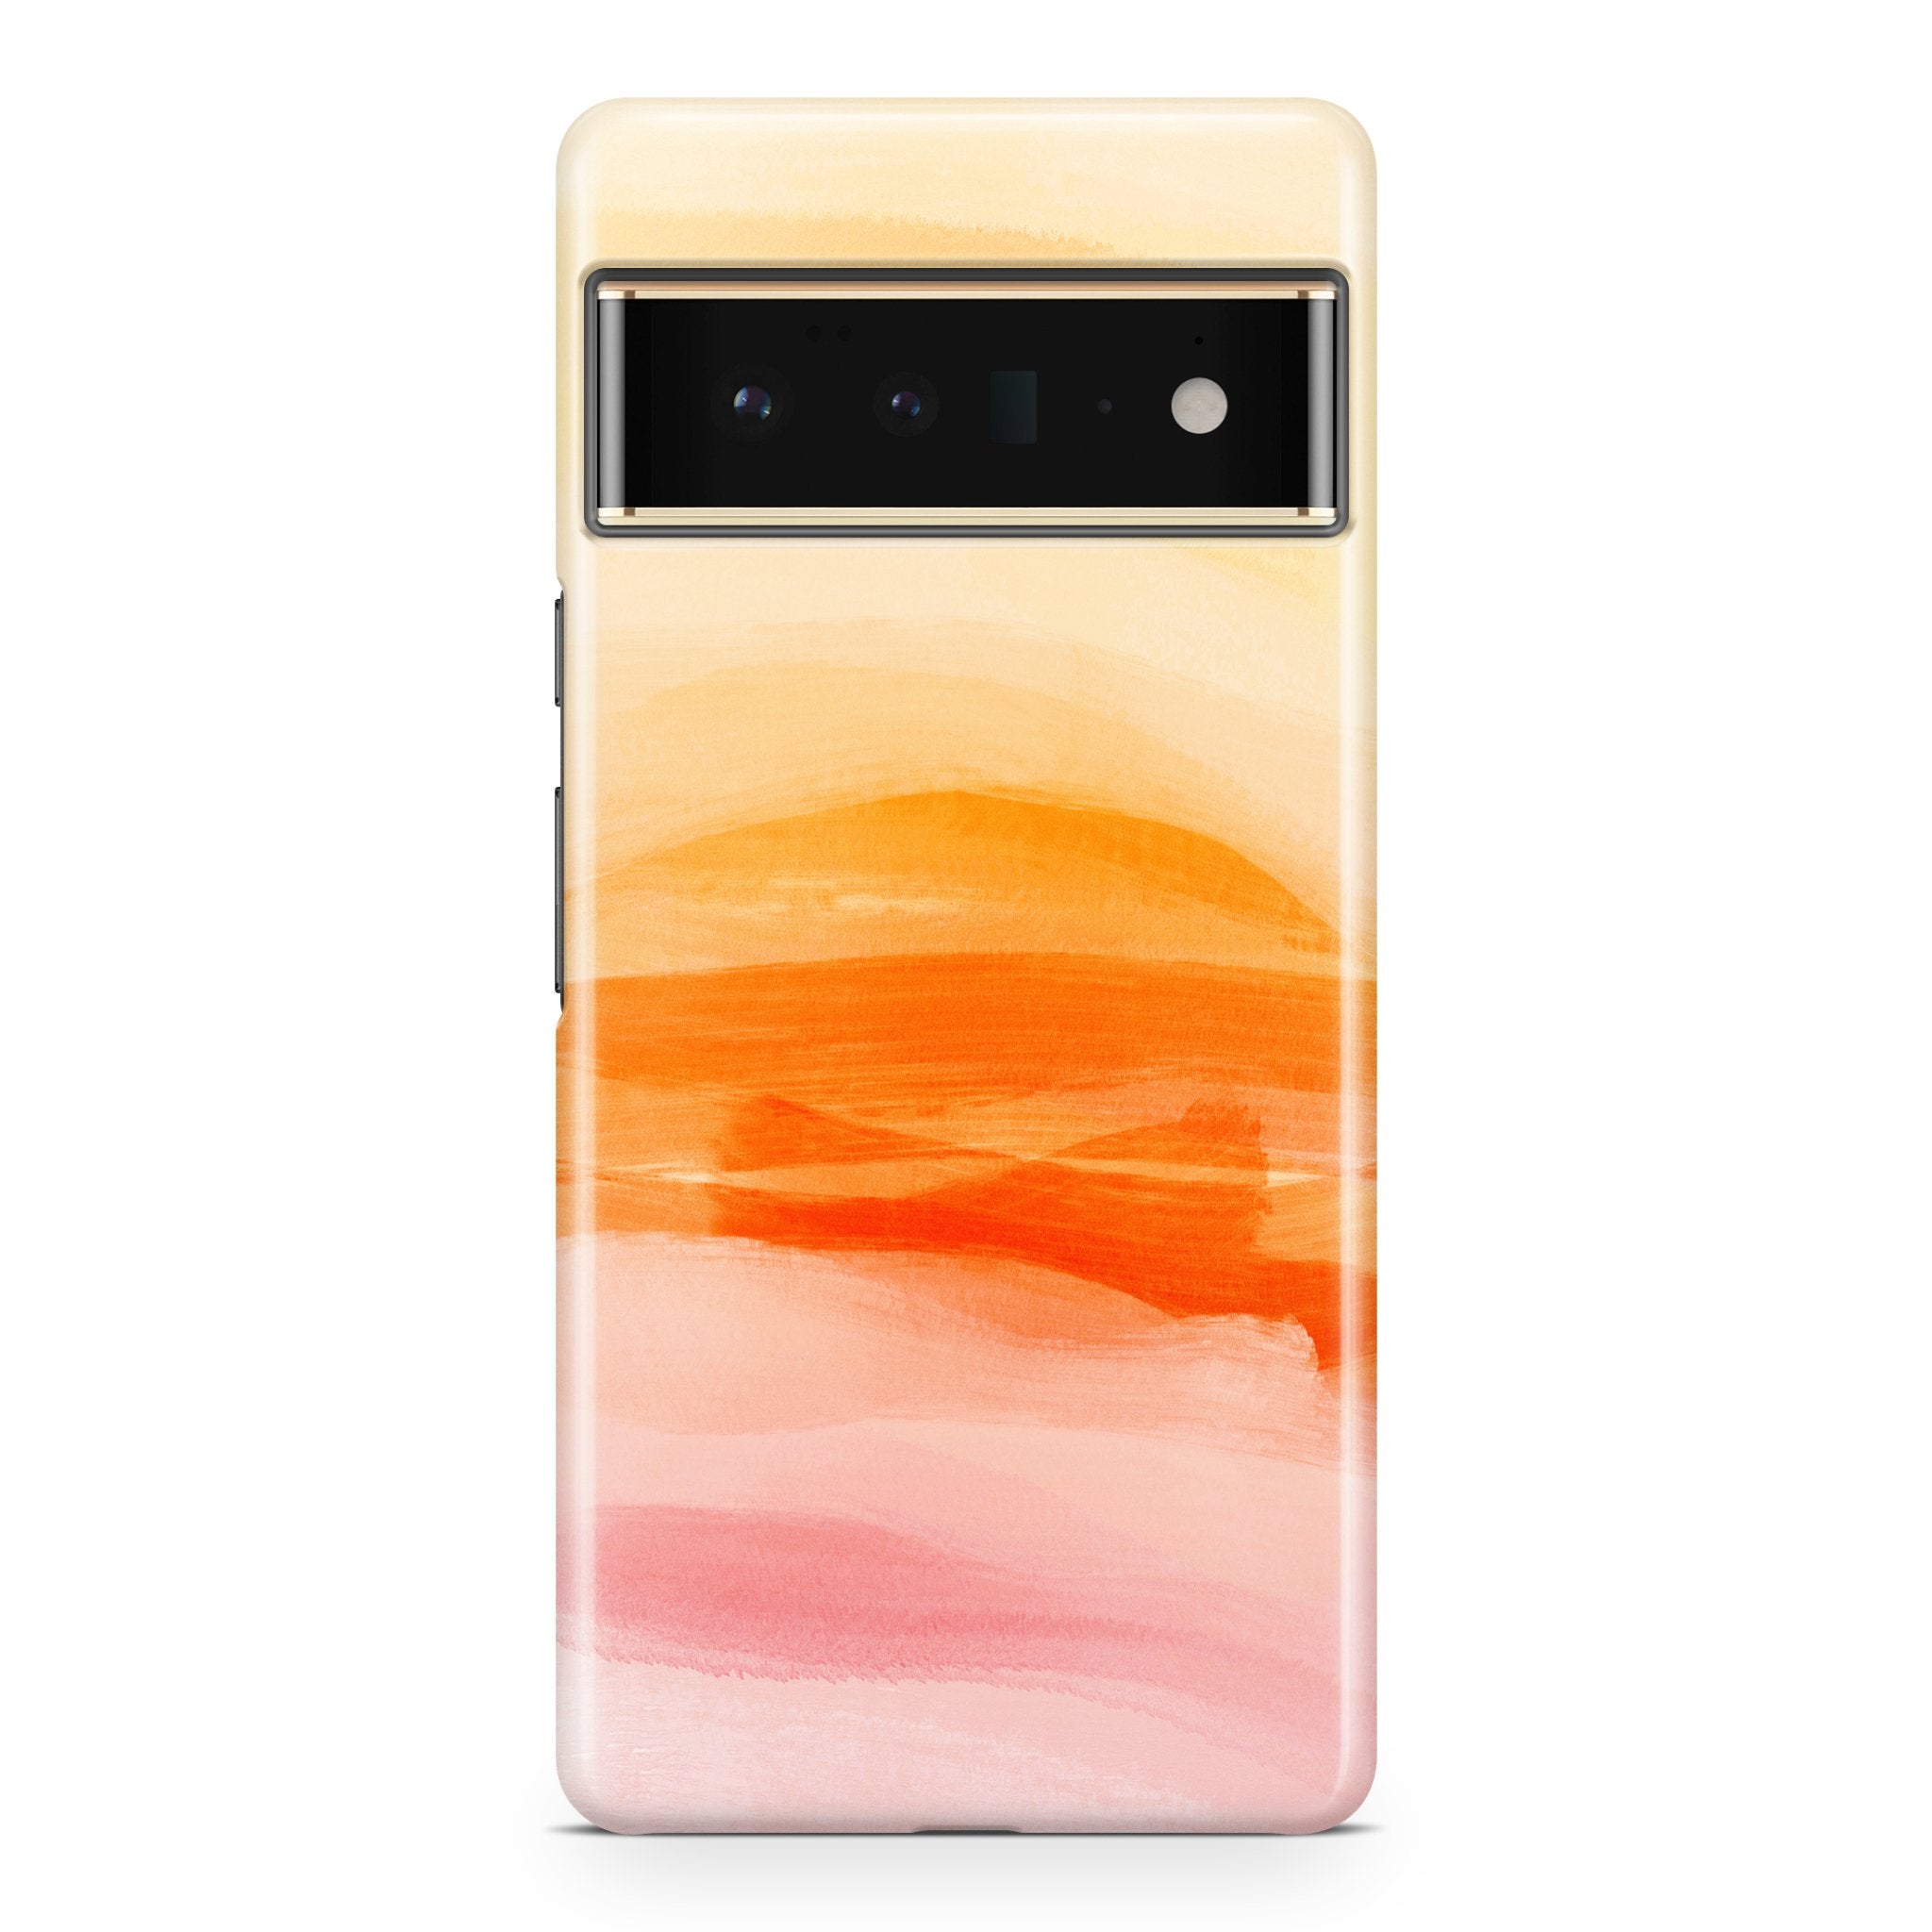 Blazing Orange Ombre - Google phone case designs by CaseSwagger